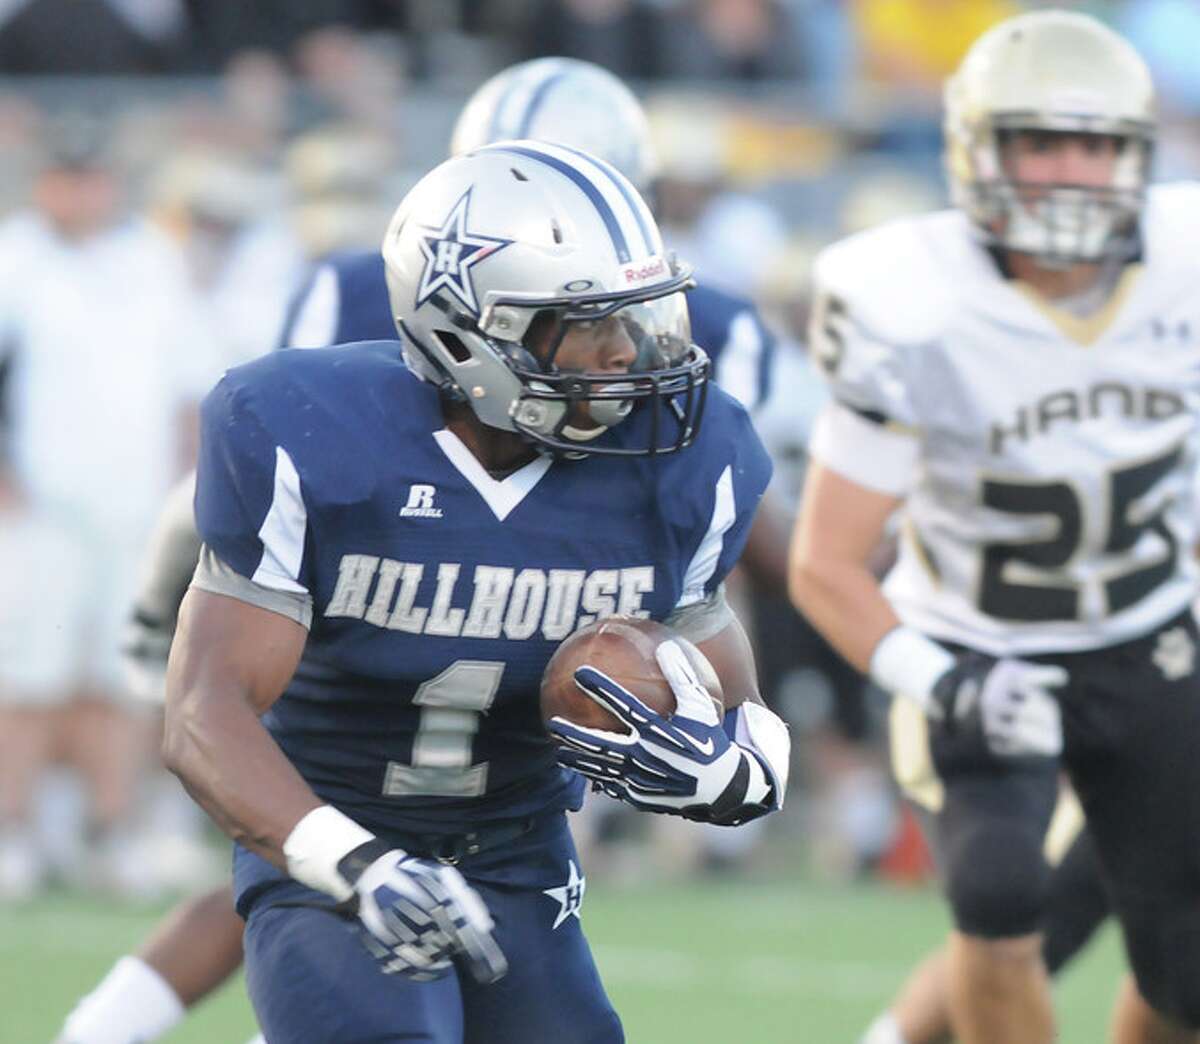 Hillhouse’s Harold Cooper looks for room to run in the Academic’s loss to Hand Sept. 20, 2013. Mara Lavitt, Register. Cooper went over 5,000 yards for his career in the game.